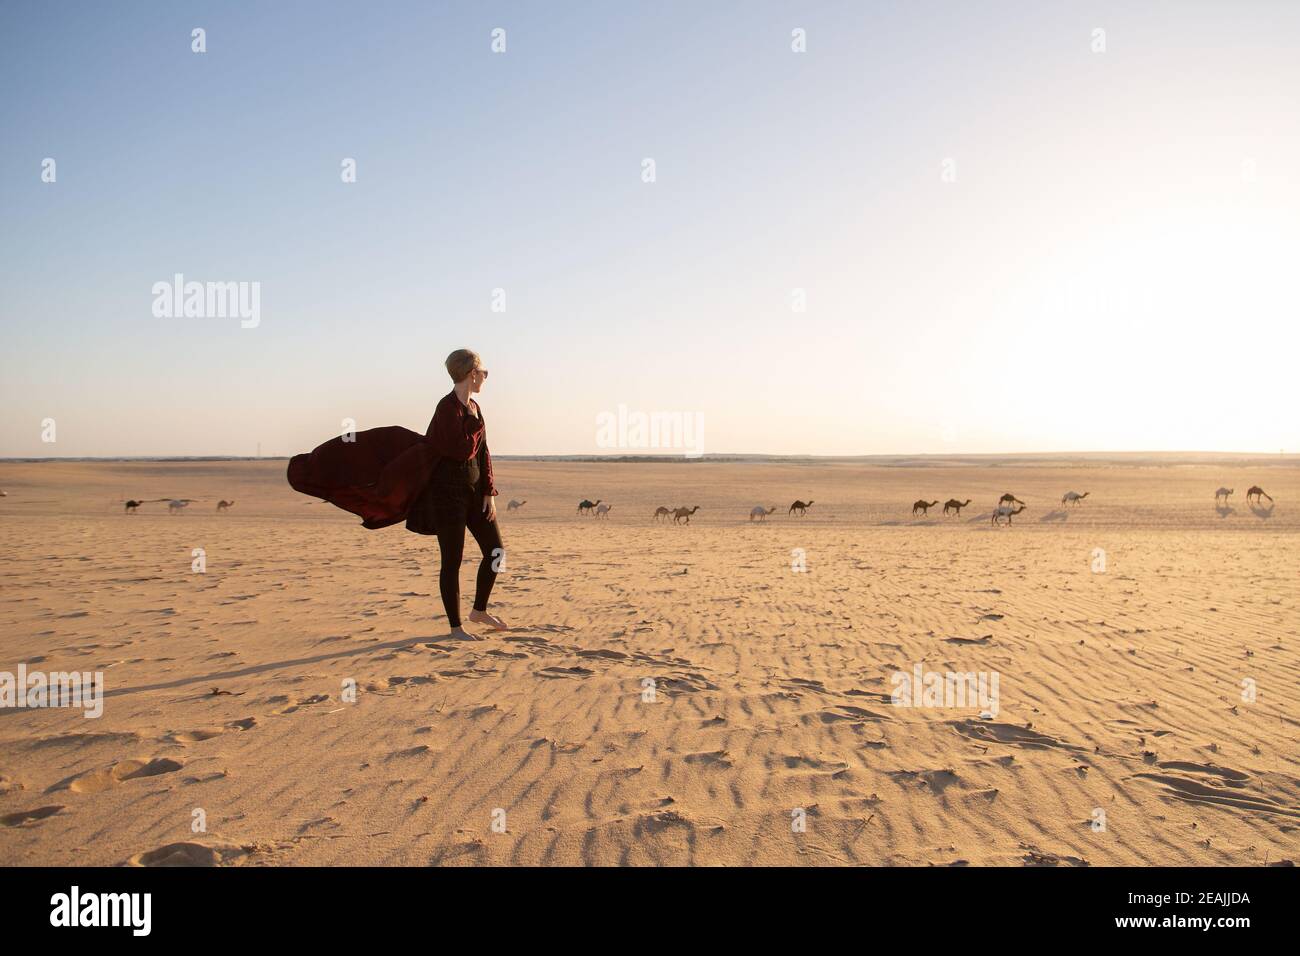 Young caucasian woman with dark red abaya in the Salisil desert in Saudi Arabia with camels in background Stock Photo